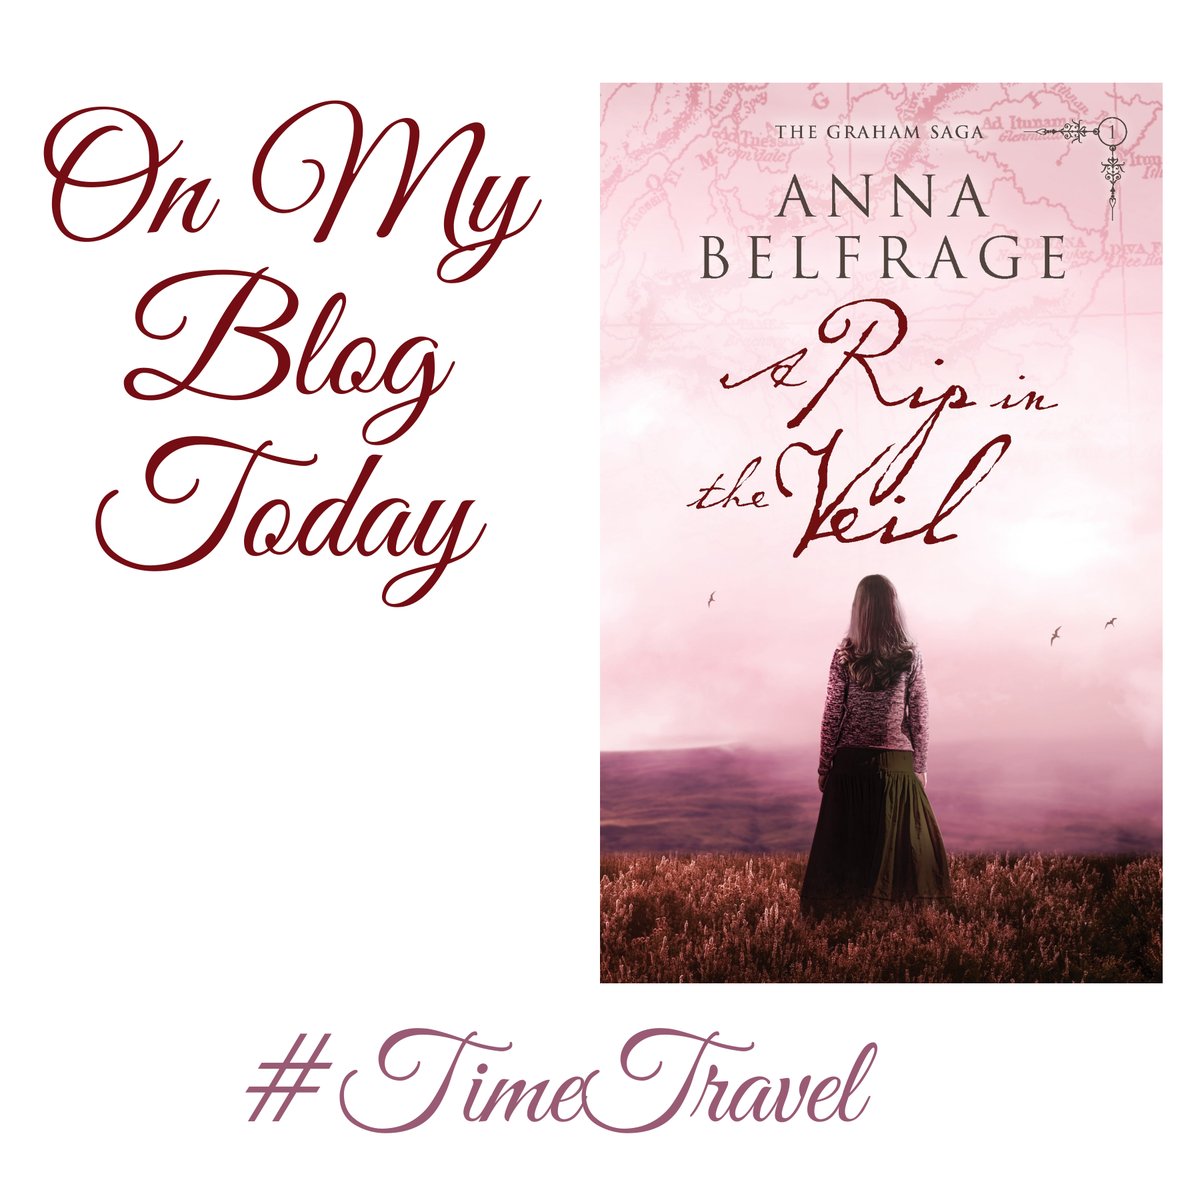 #Interview with Alex, the leading lady of A Rip in the Veil by Anna Belfrage @abelfrageauthor @cathiedunn #HistoricalFiction #TimeTravelRomance #BlogTour #TheCoffeePotBookClub trbr.io/J8sIe64 via @ViviMackade